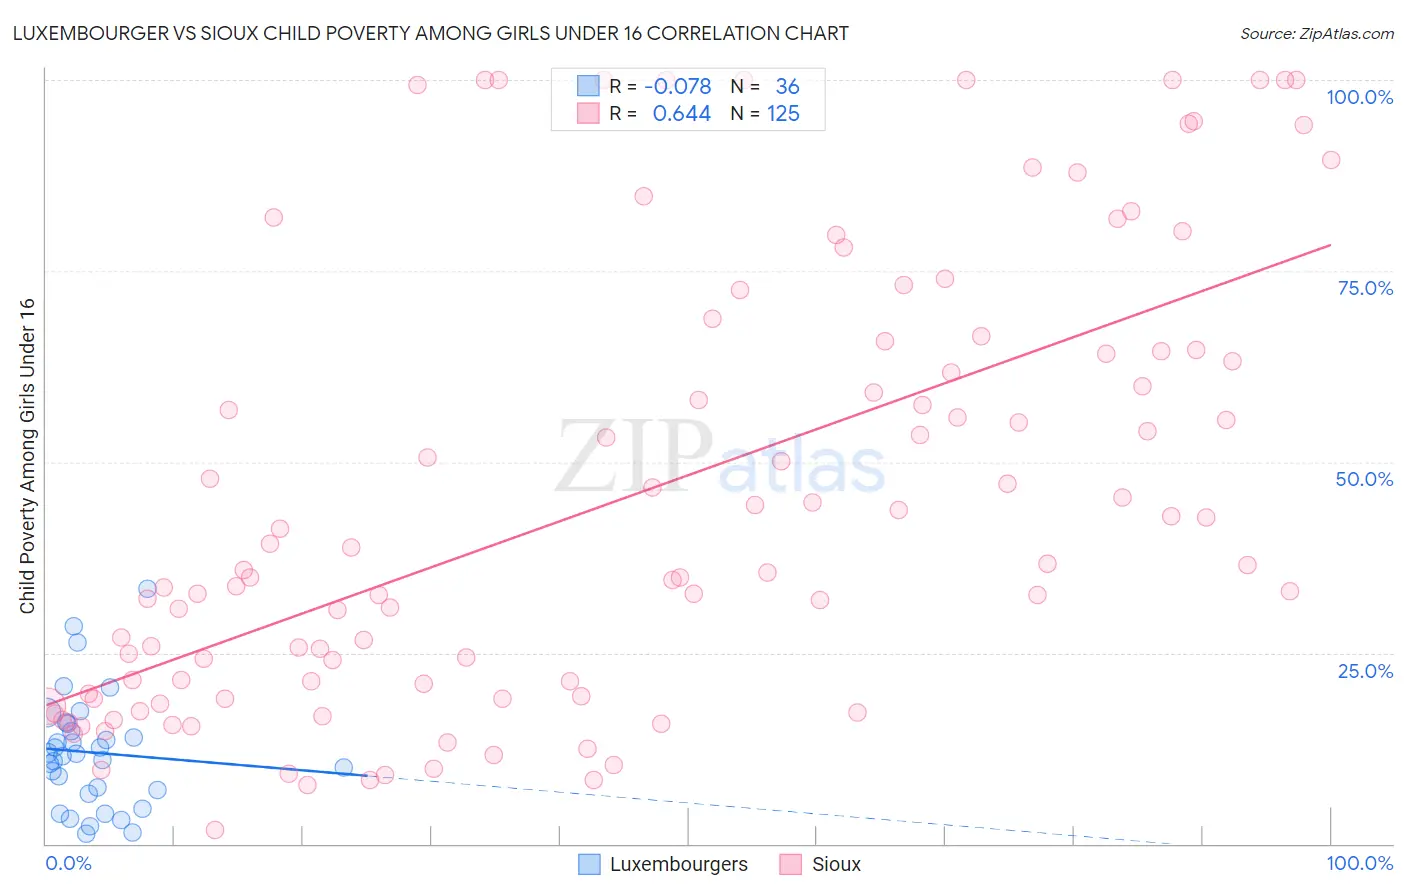 Luxembourger vs Sioux Child Poverty Among Girls Under 16